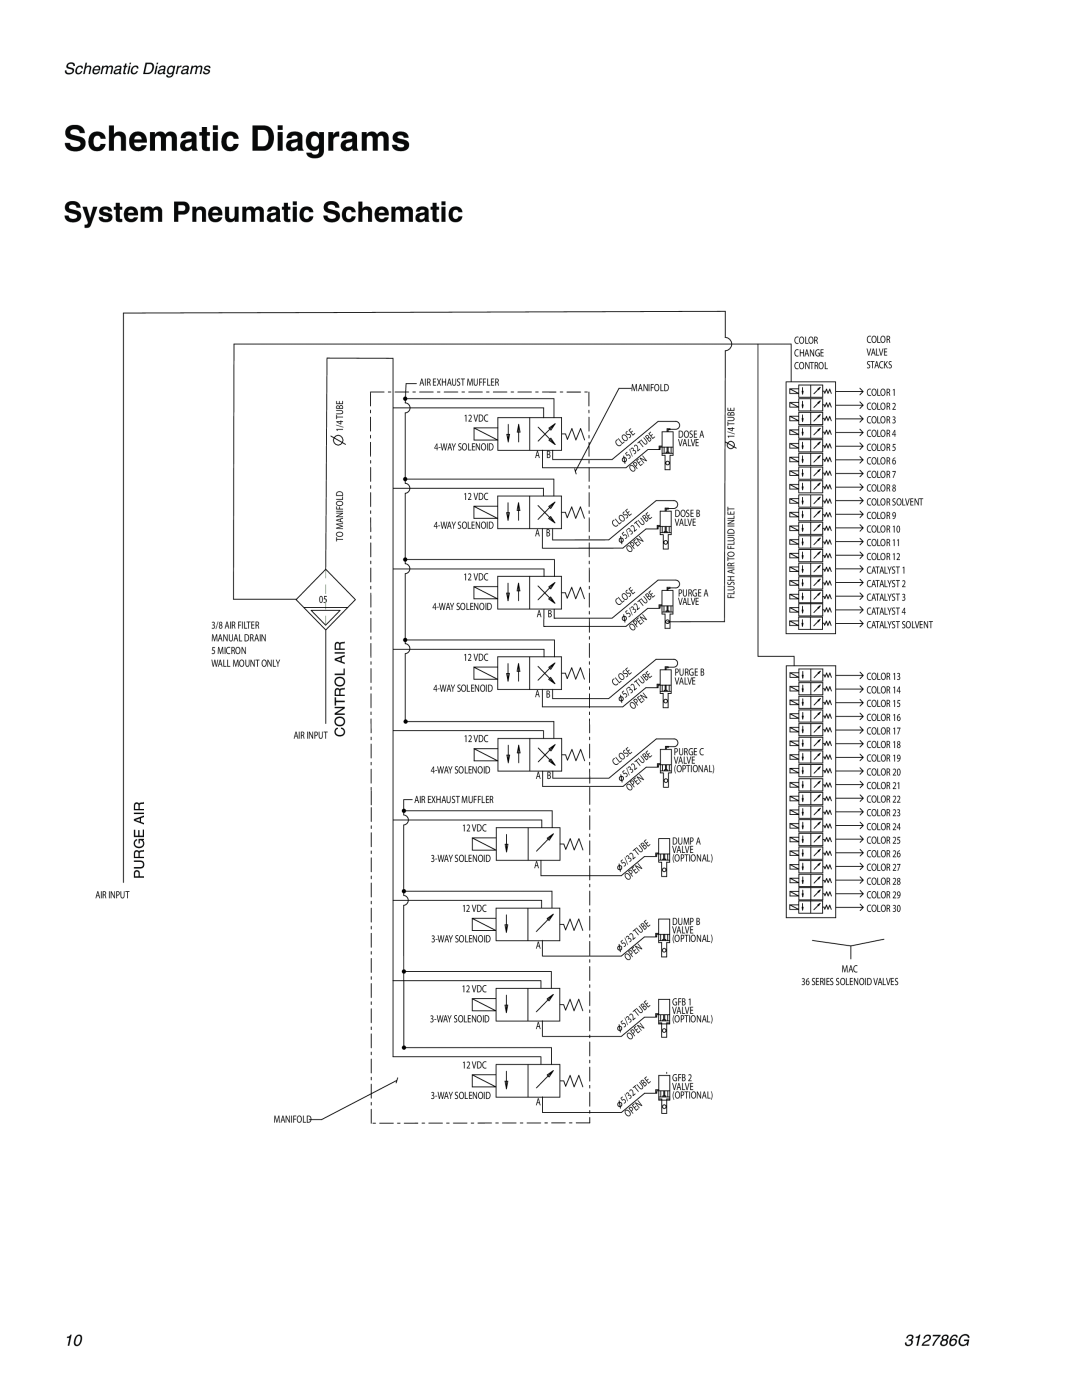 Graco TI12954a, TI12743a important safety instructions Schematic Diagrams, System Pneumatic Schematic, 312786G 